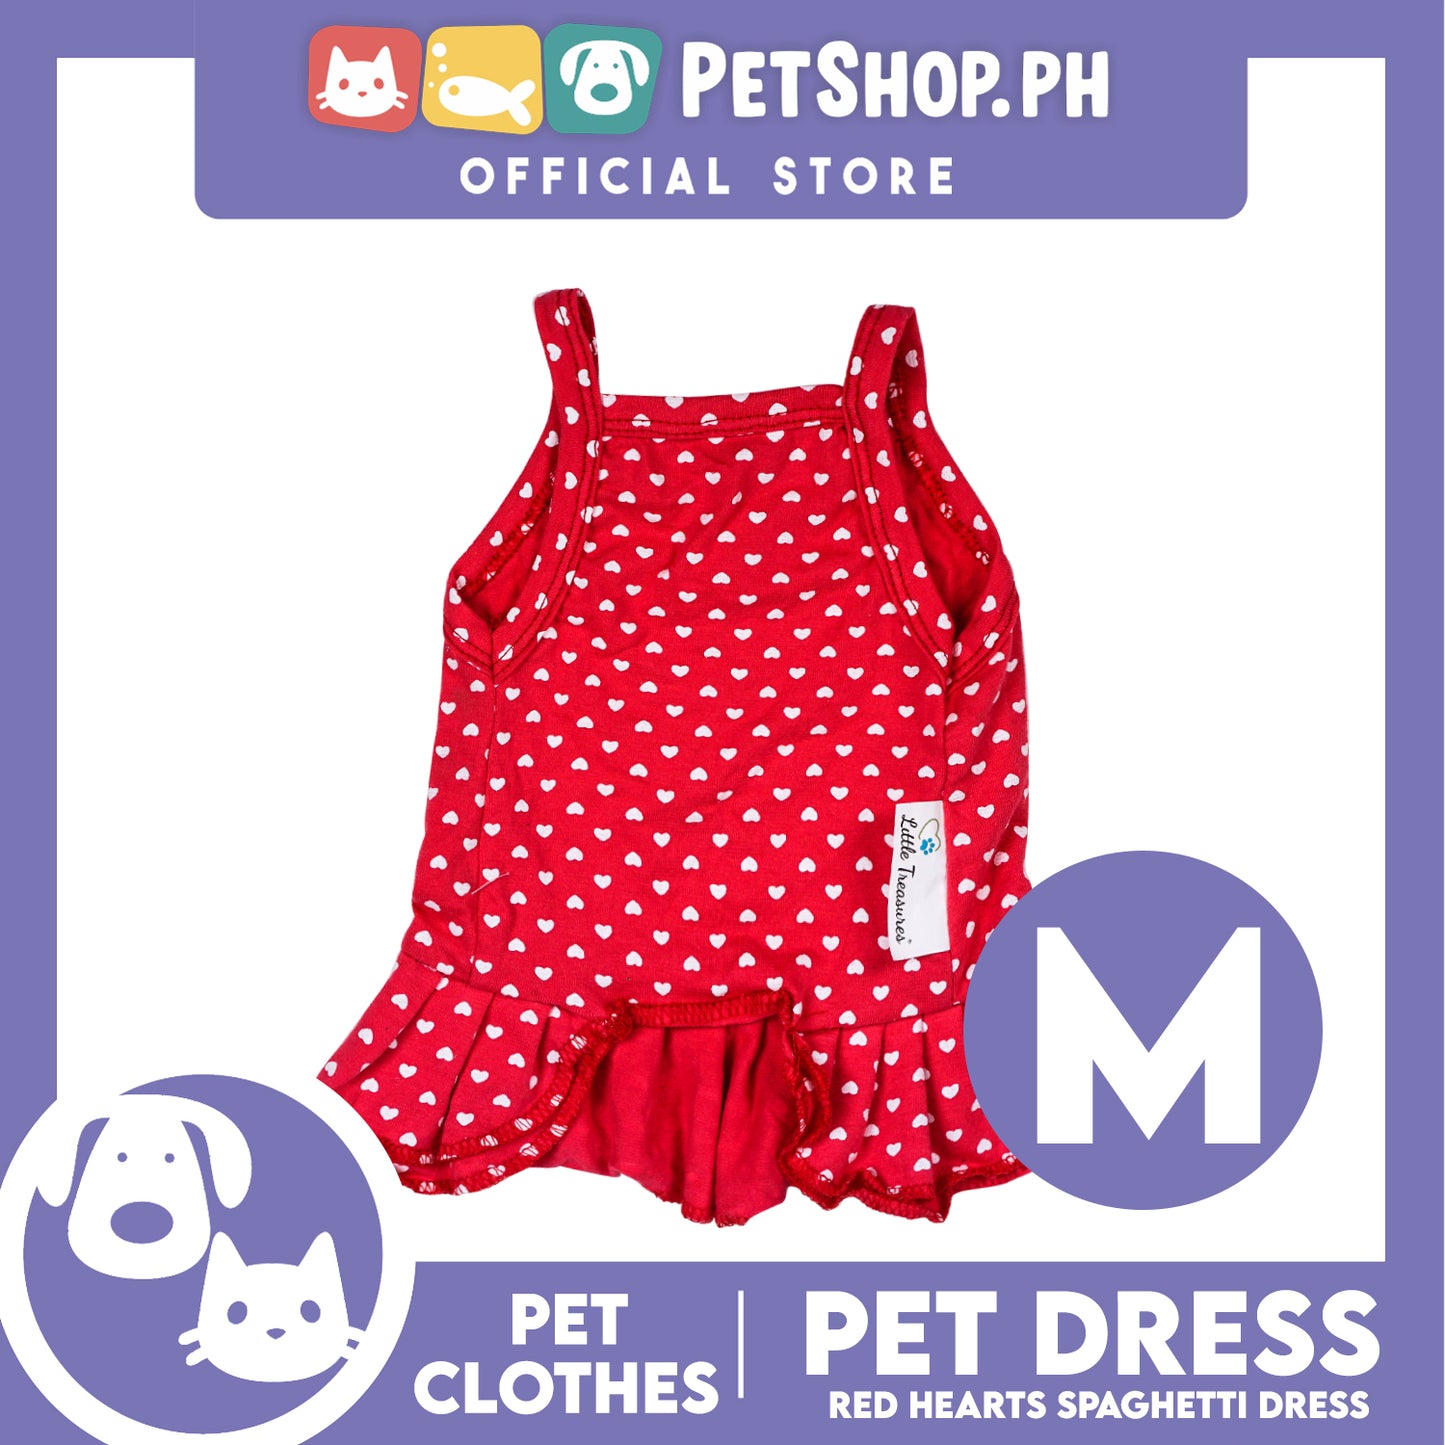 Pet Dress Red Spaghetti with Heart Design Pet Clothes (Medium) Perfect Fit for Dogs and Cats